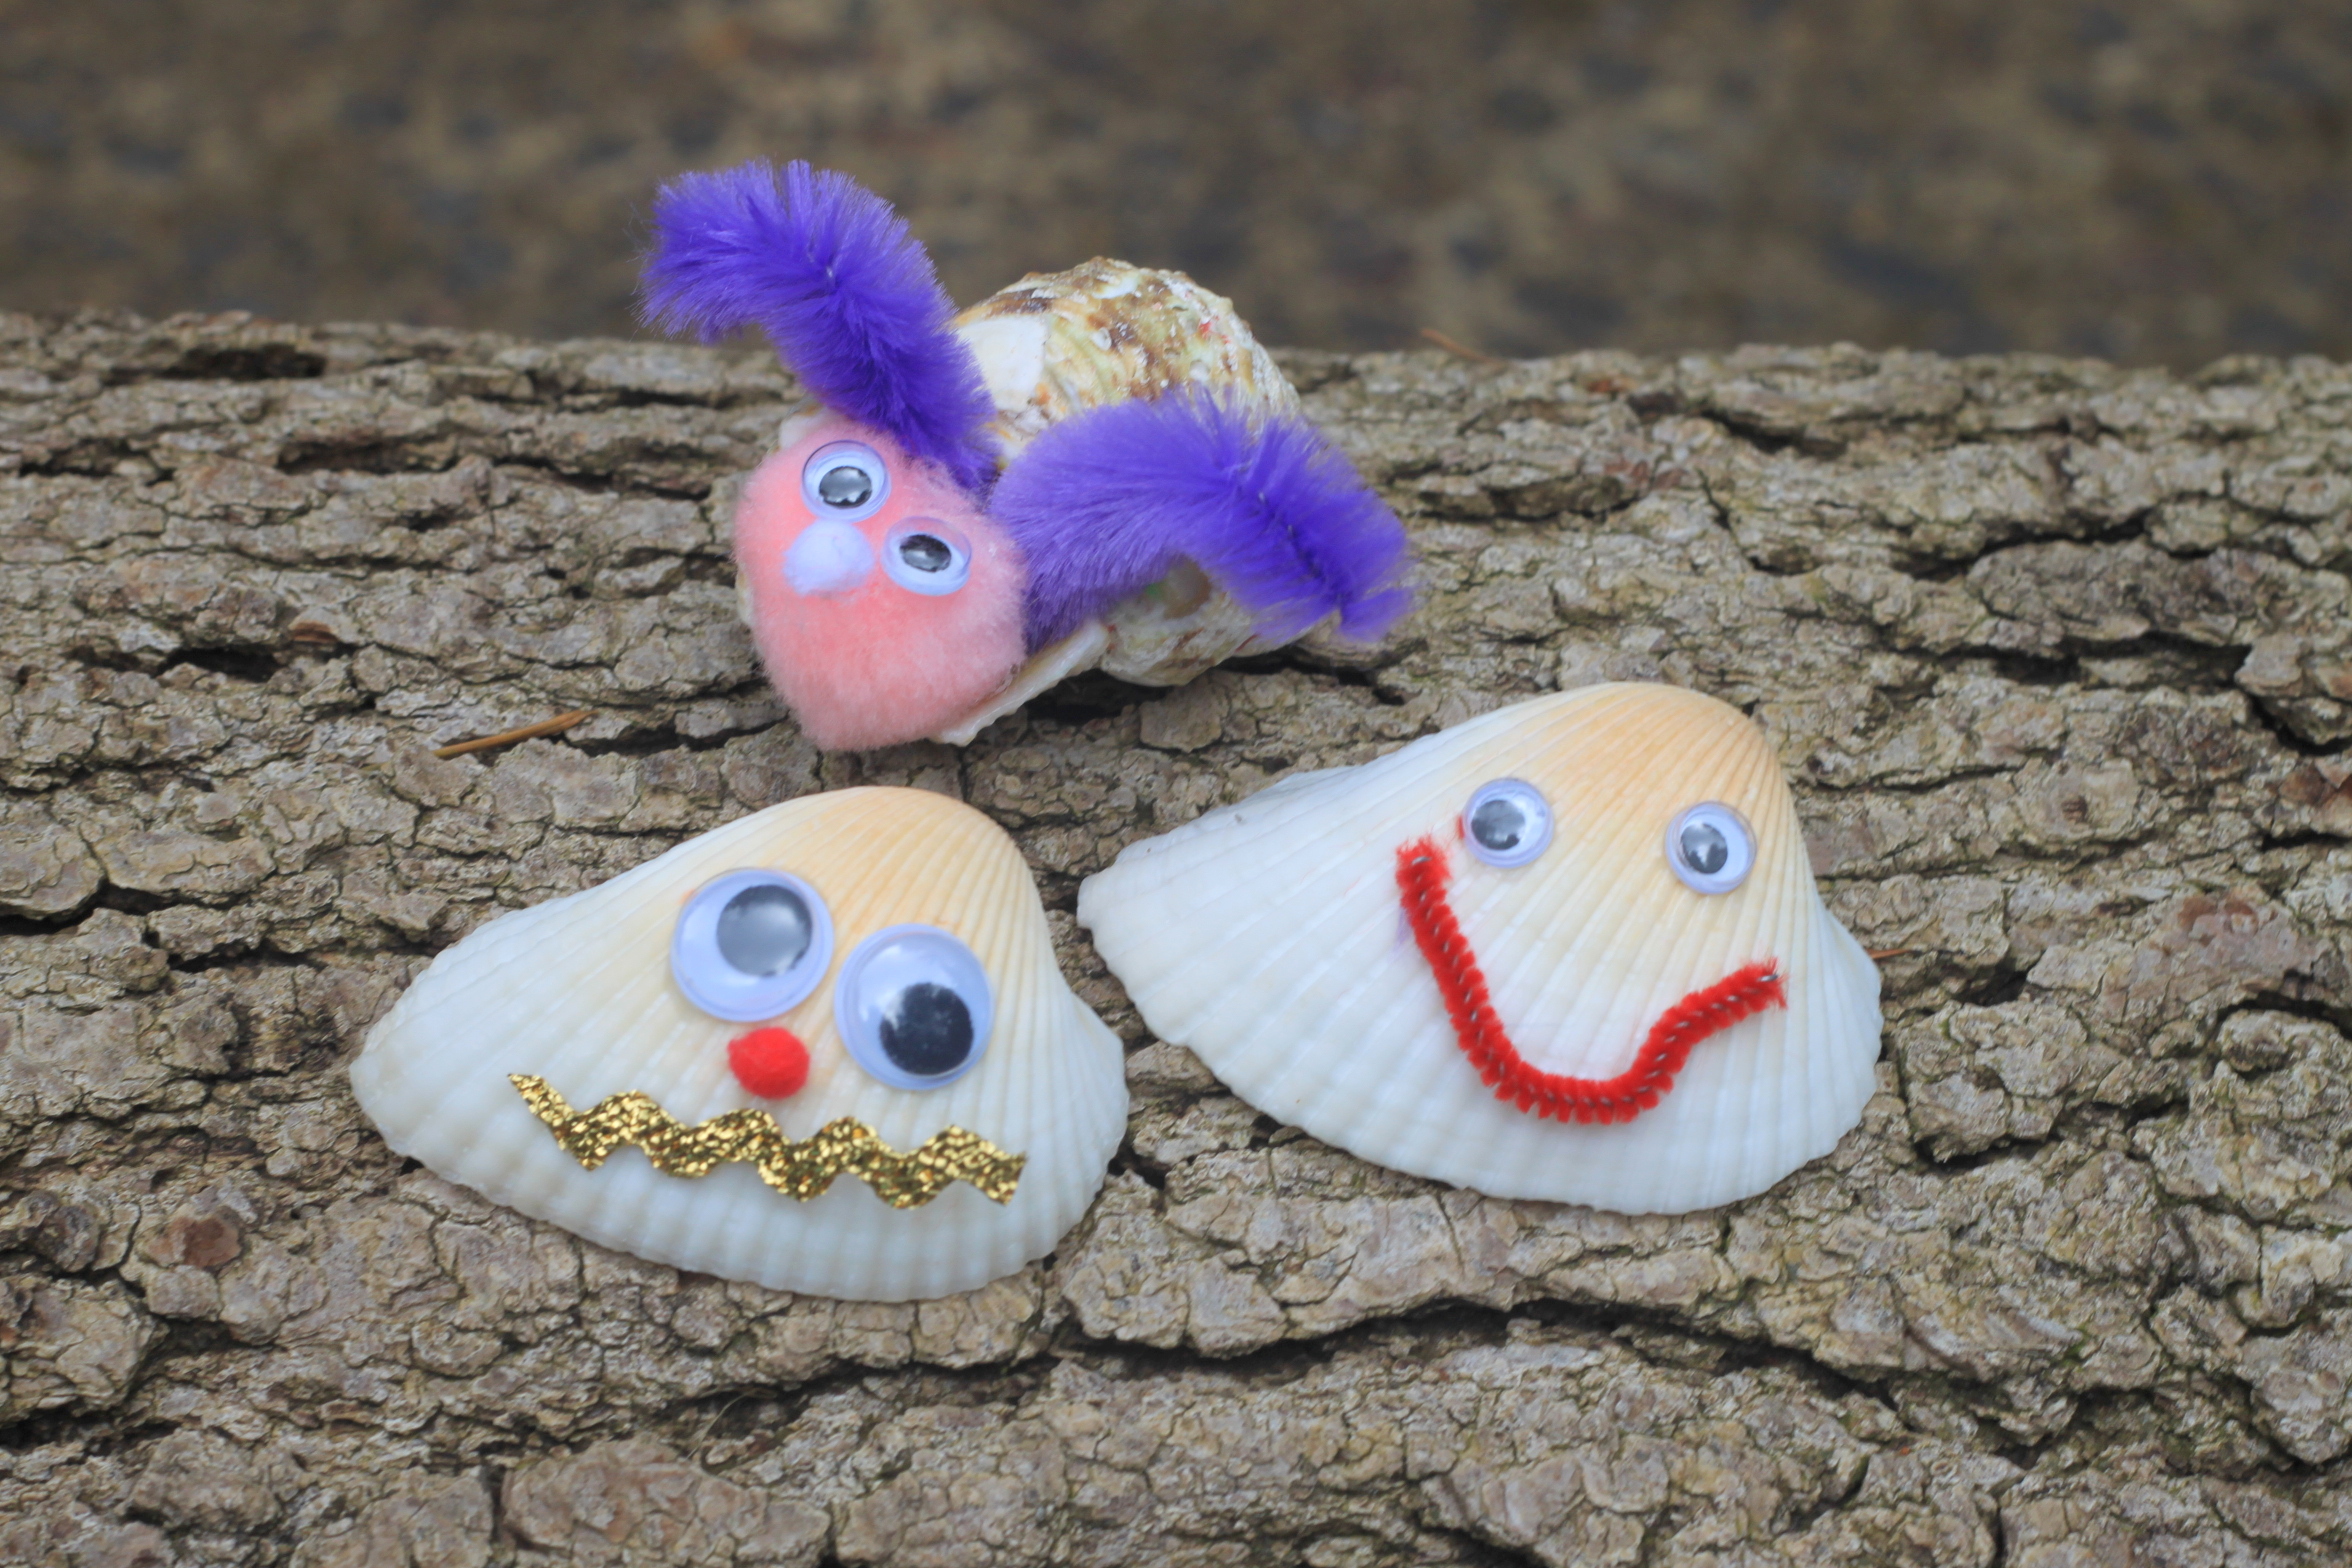 30 SEASHELL CRAFTS for kids and adults for a creative summer.